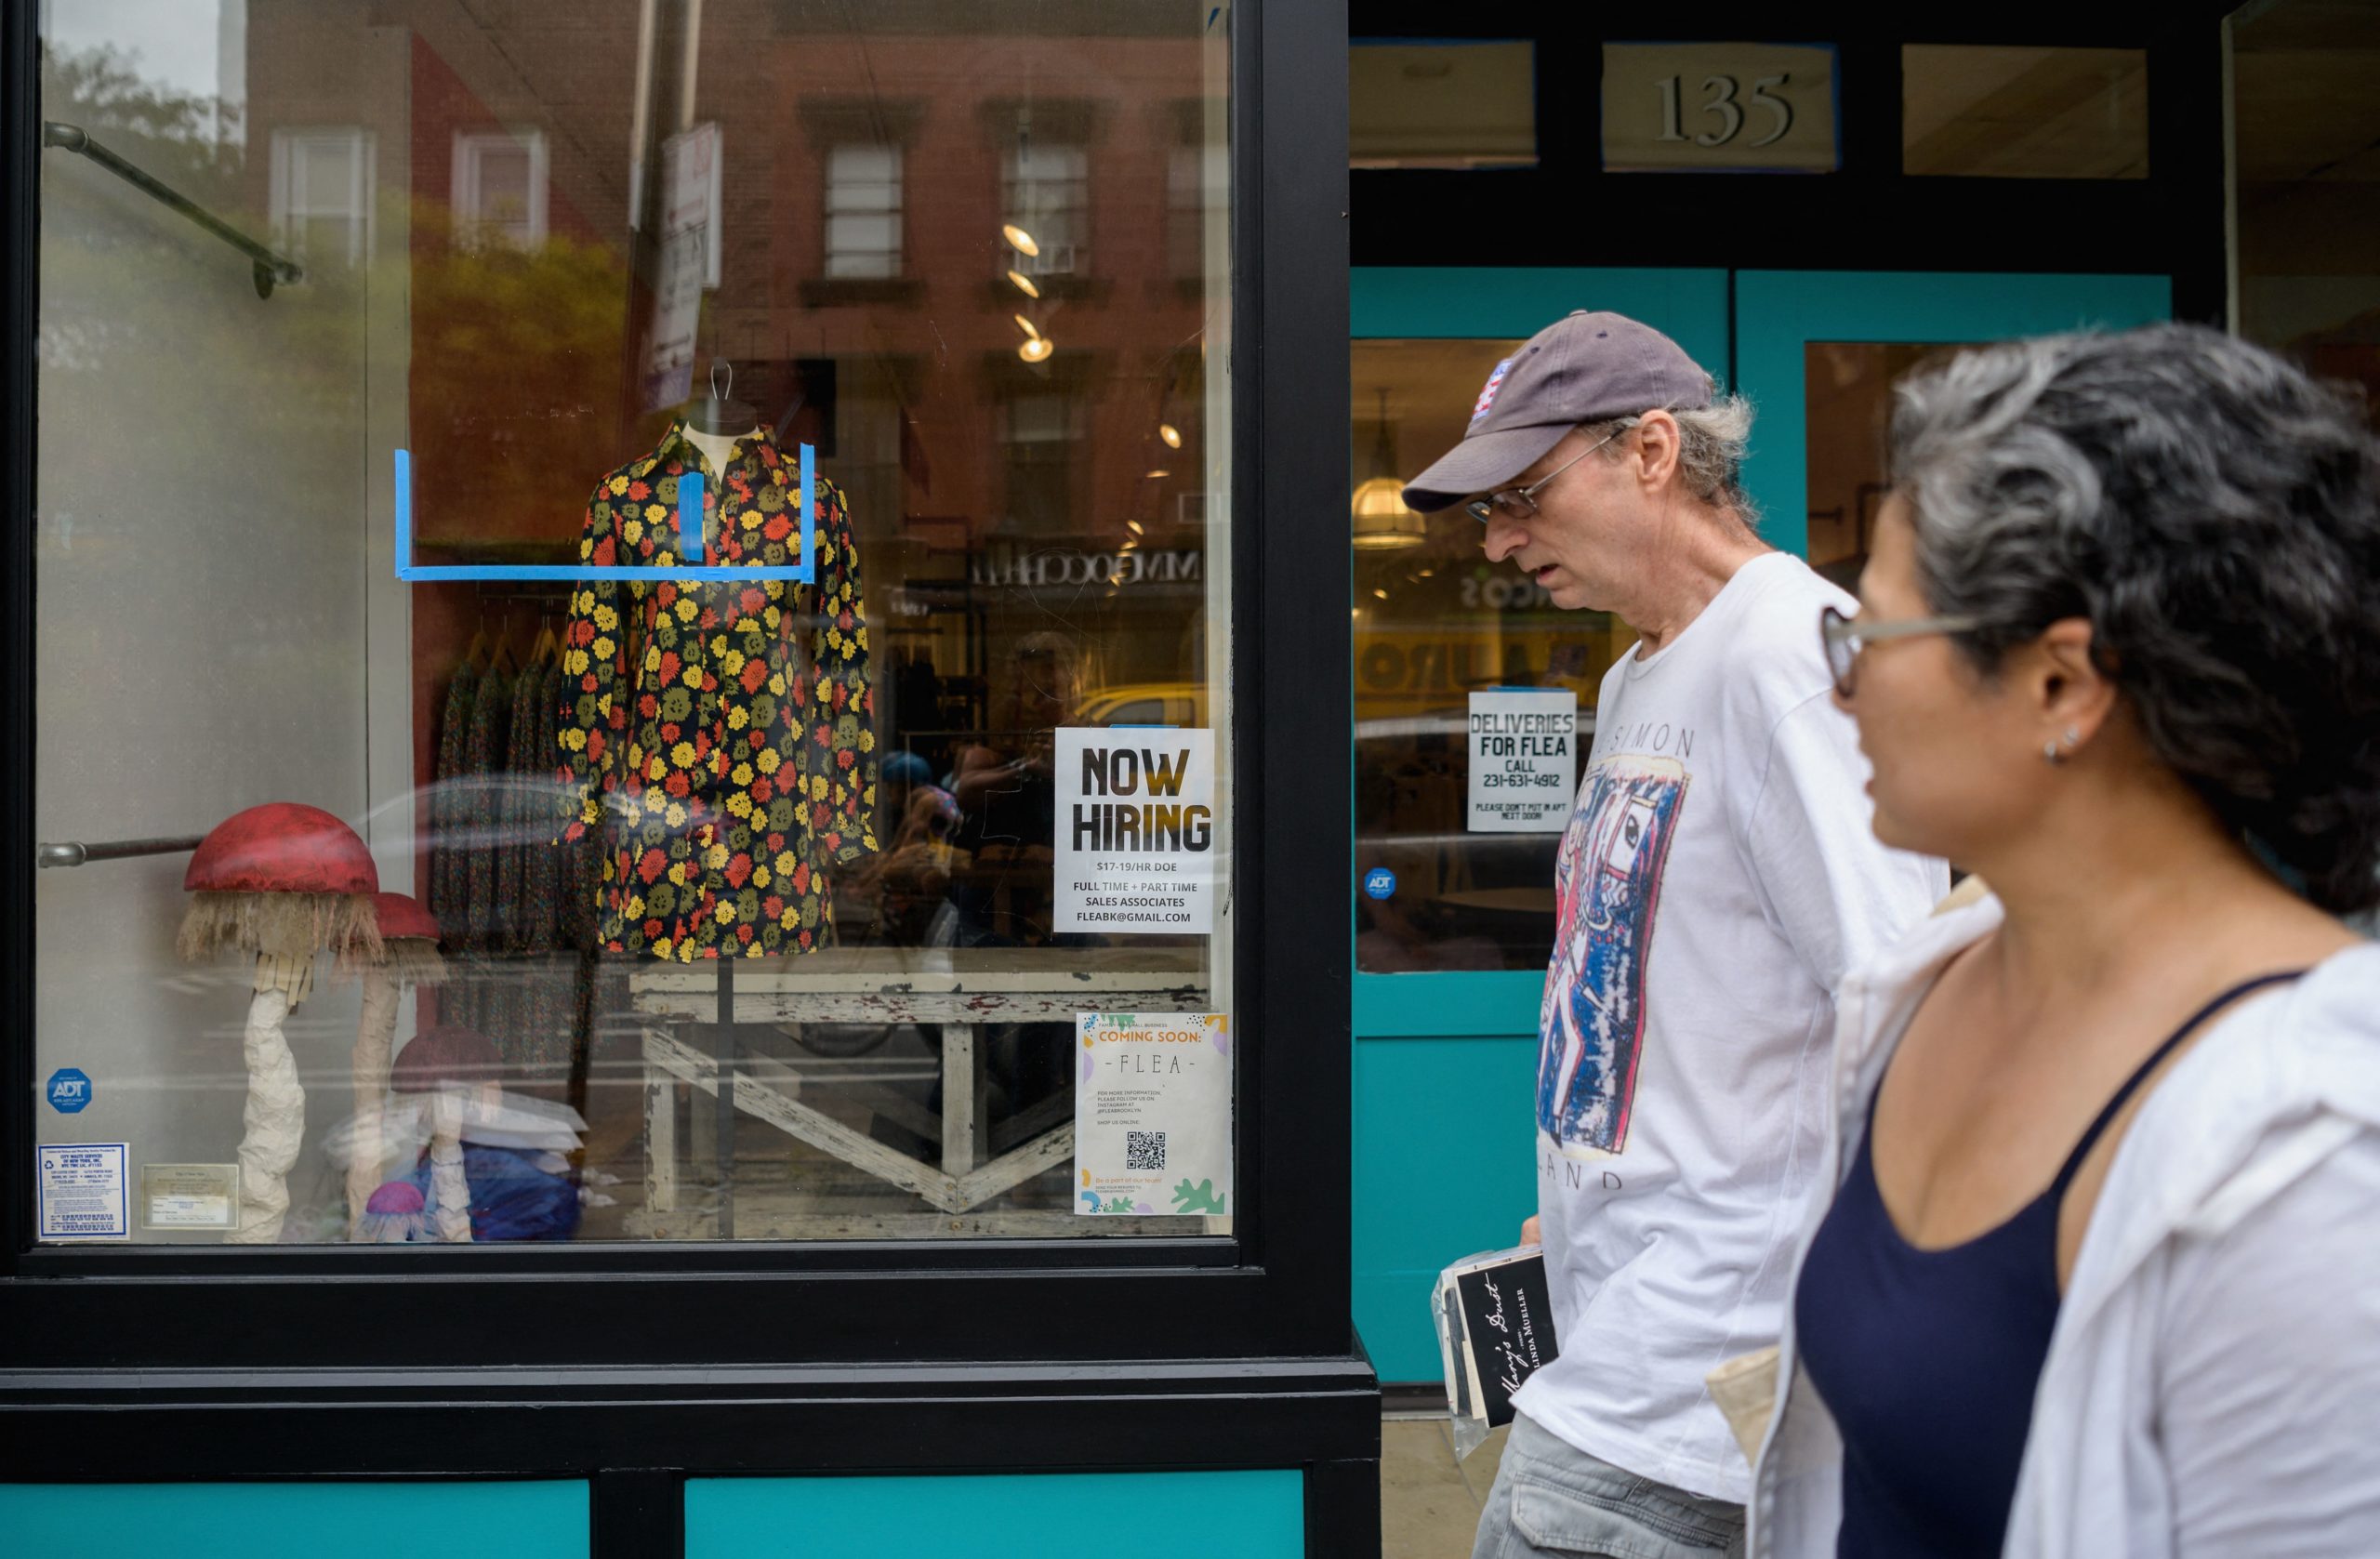 Two people walk past a 'now hiring' sign posted at a store in New York City on Aug. 20. (Angela Weiss/AFP via Getty Images)